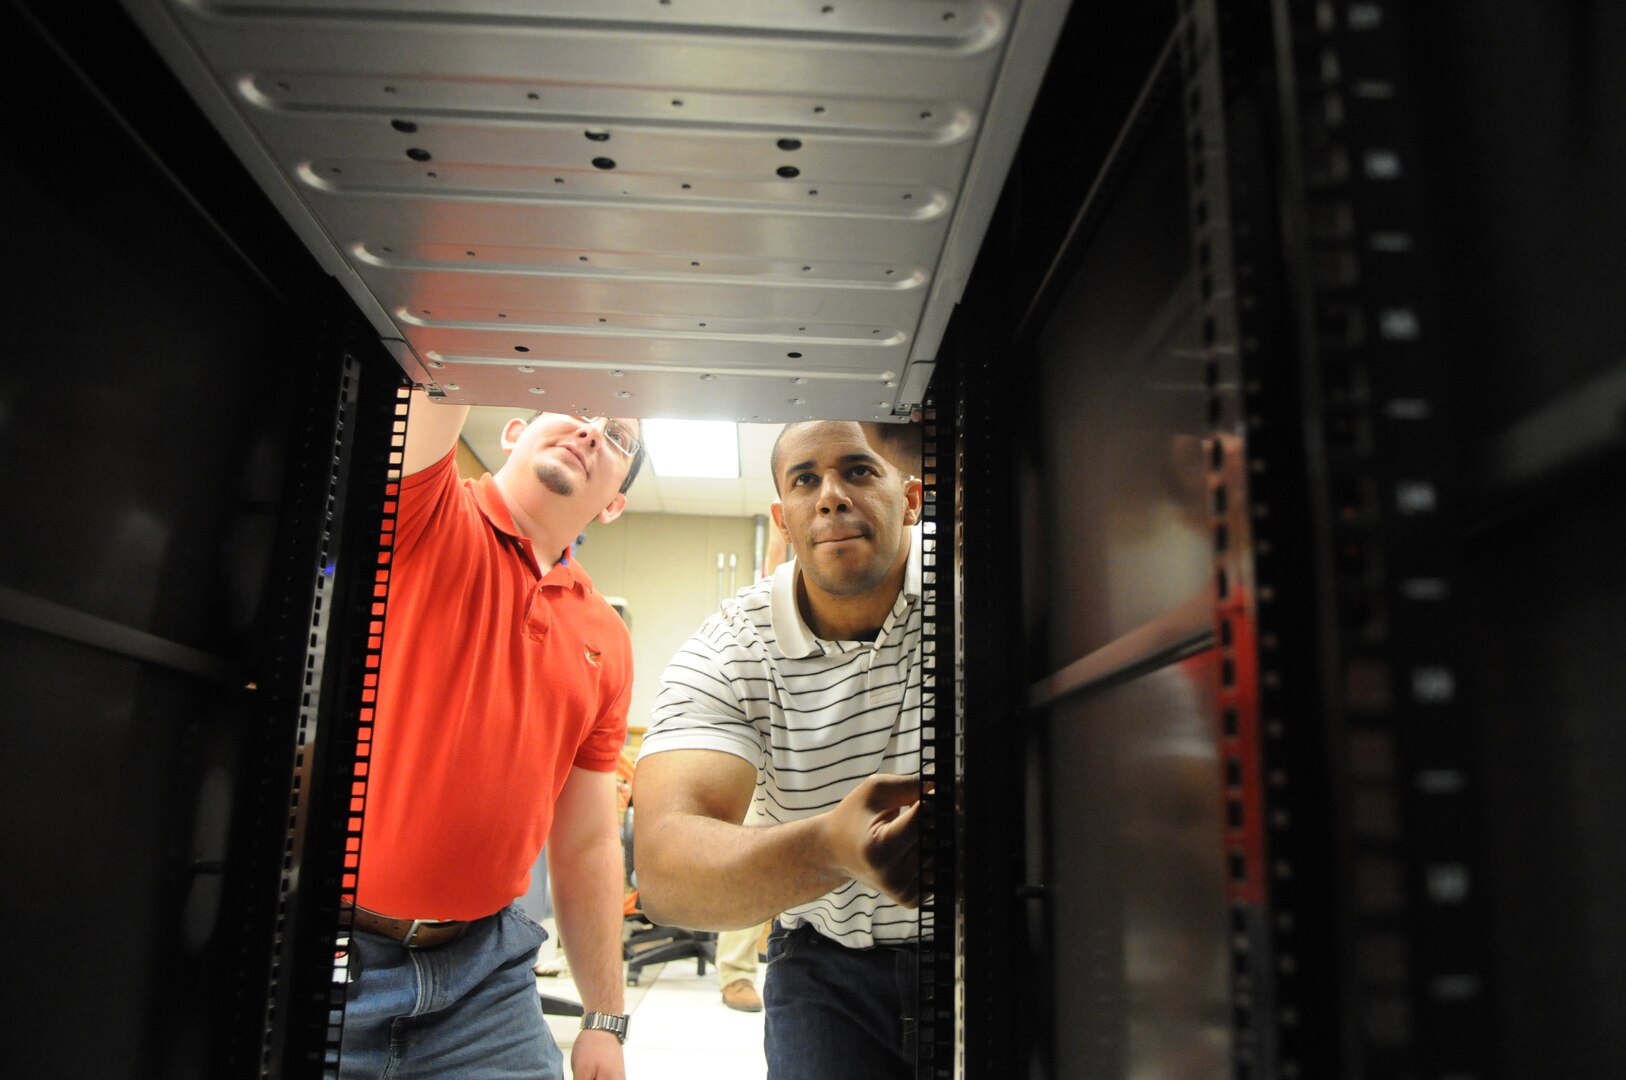 Adrian McLure (right) and Keith Epson, 902nd Communications Squadron, prepare the equipment to be used for the upcoming e-mail migration on Randolph. (U.S. Air Force photo by Rich McFadden)